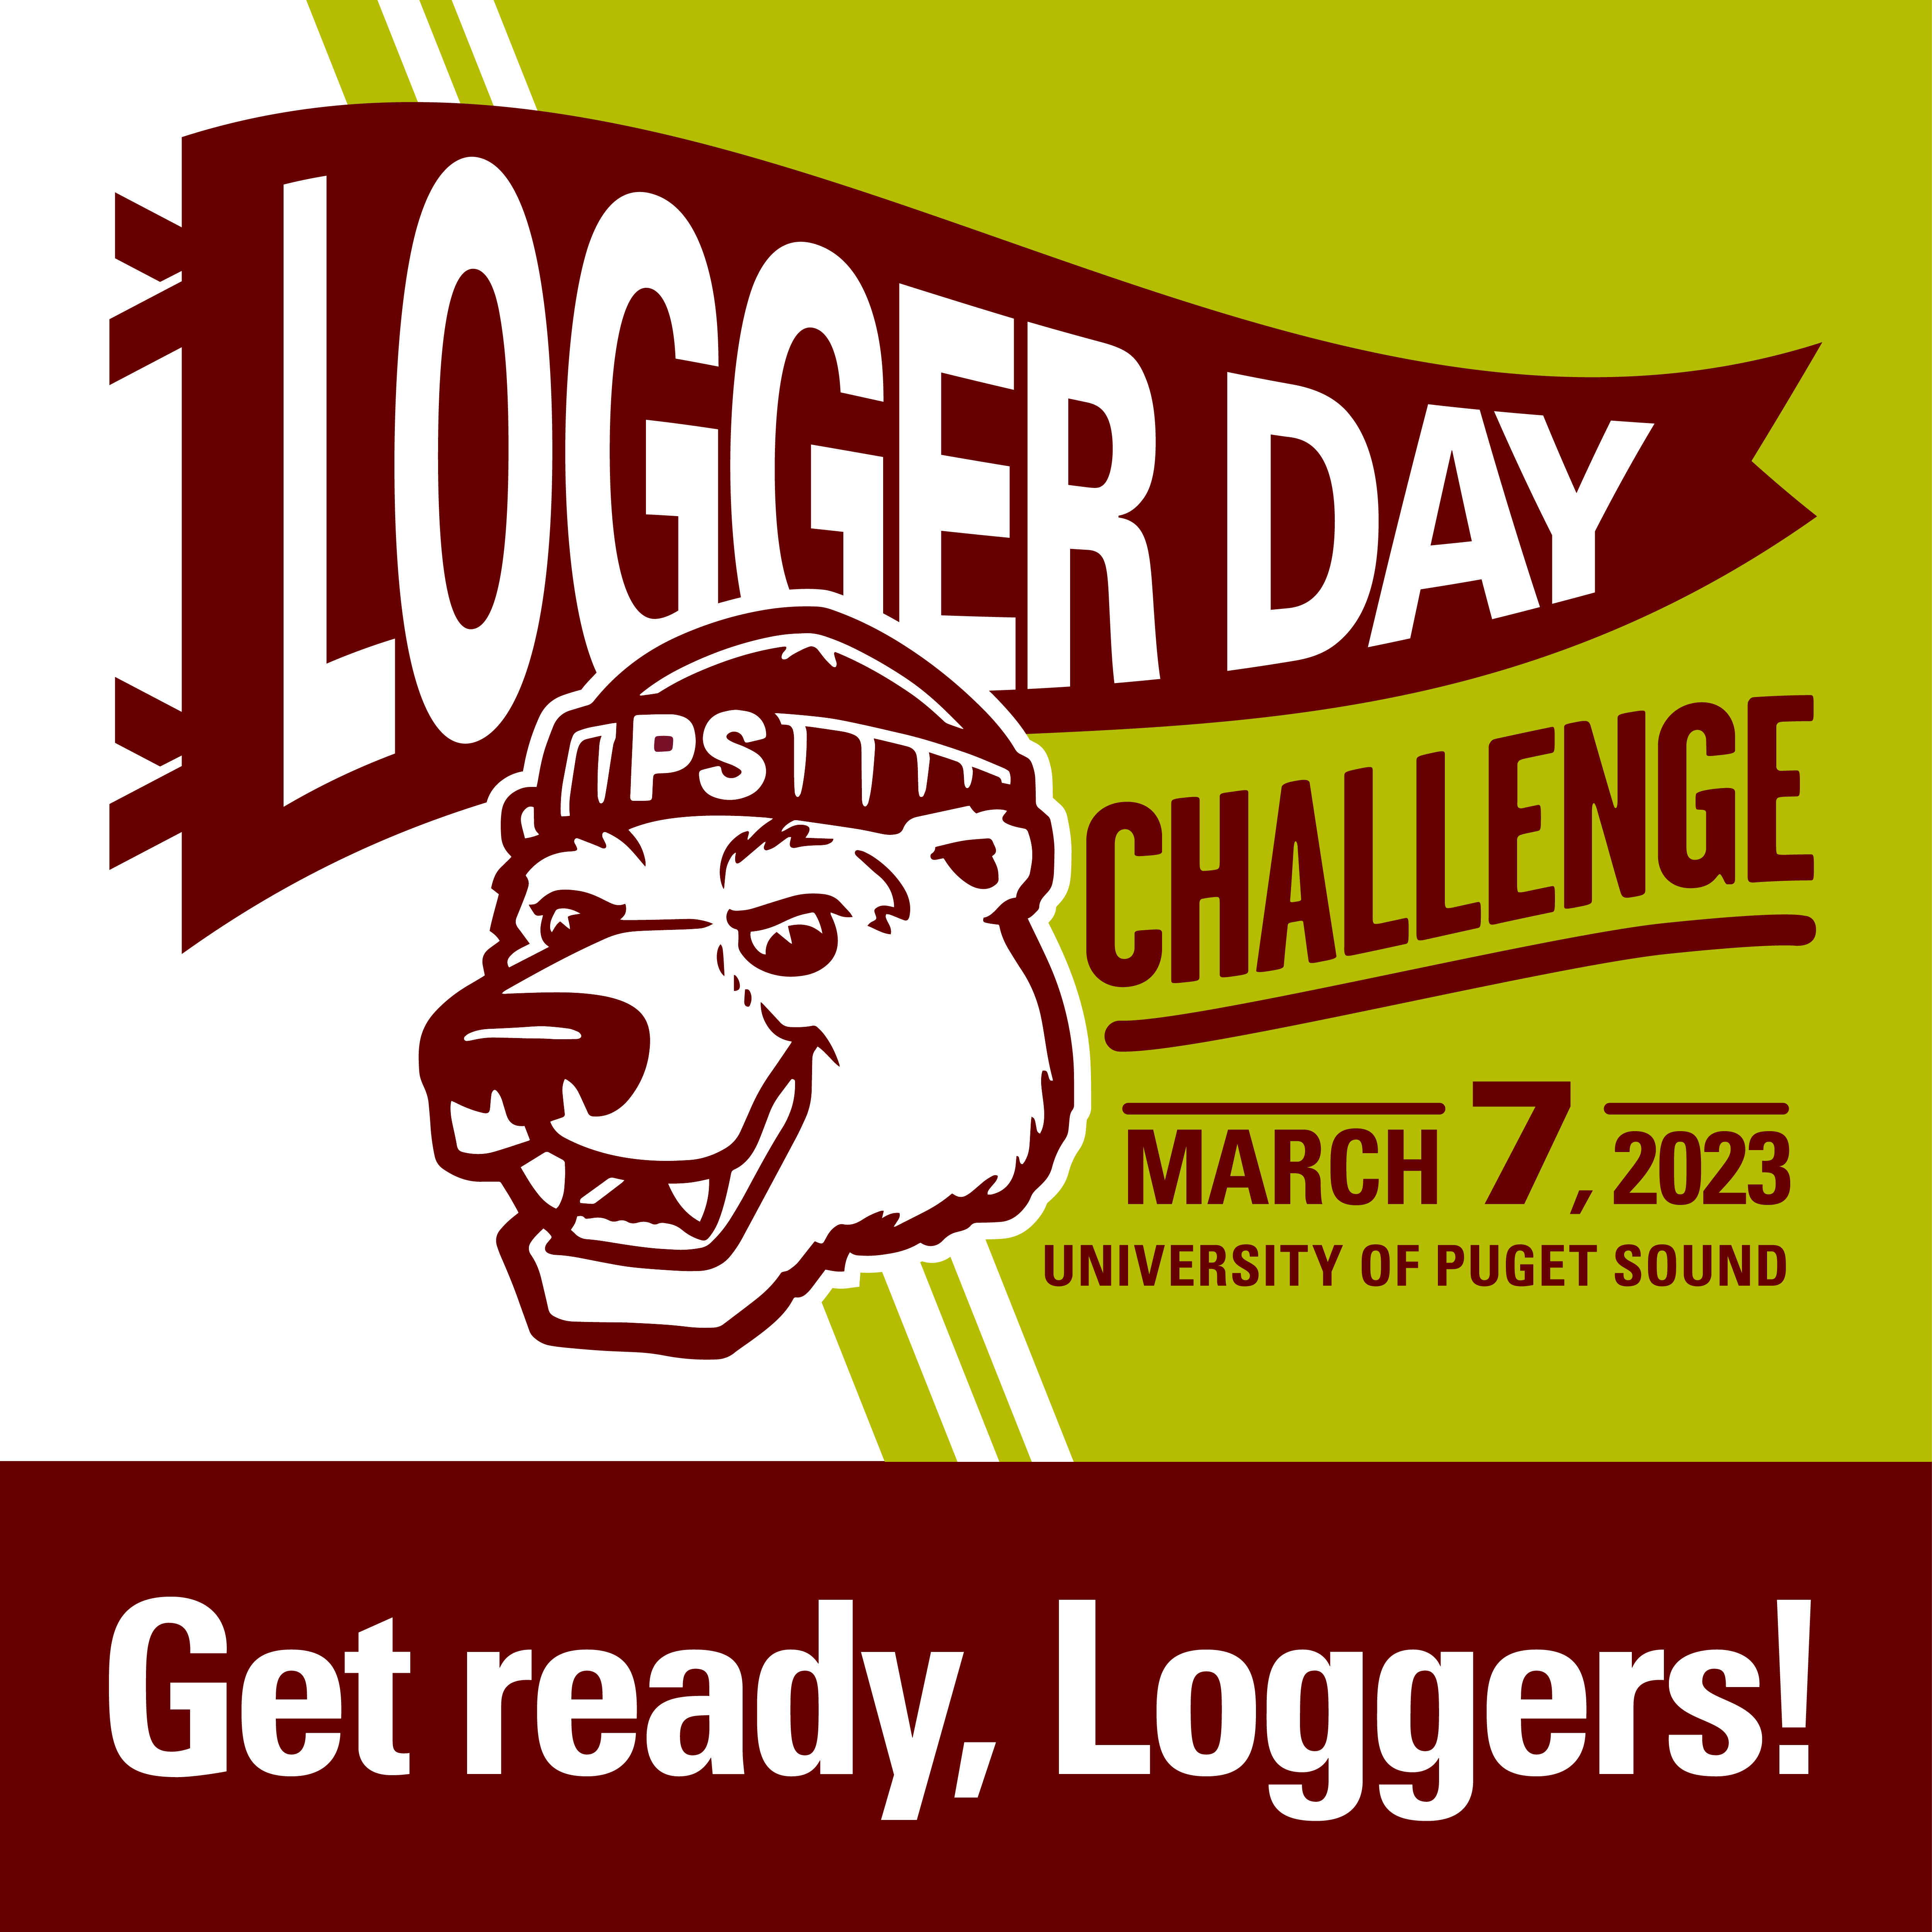 Logger Day Challenge 2023 social media badge: Get ready, Loggers